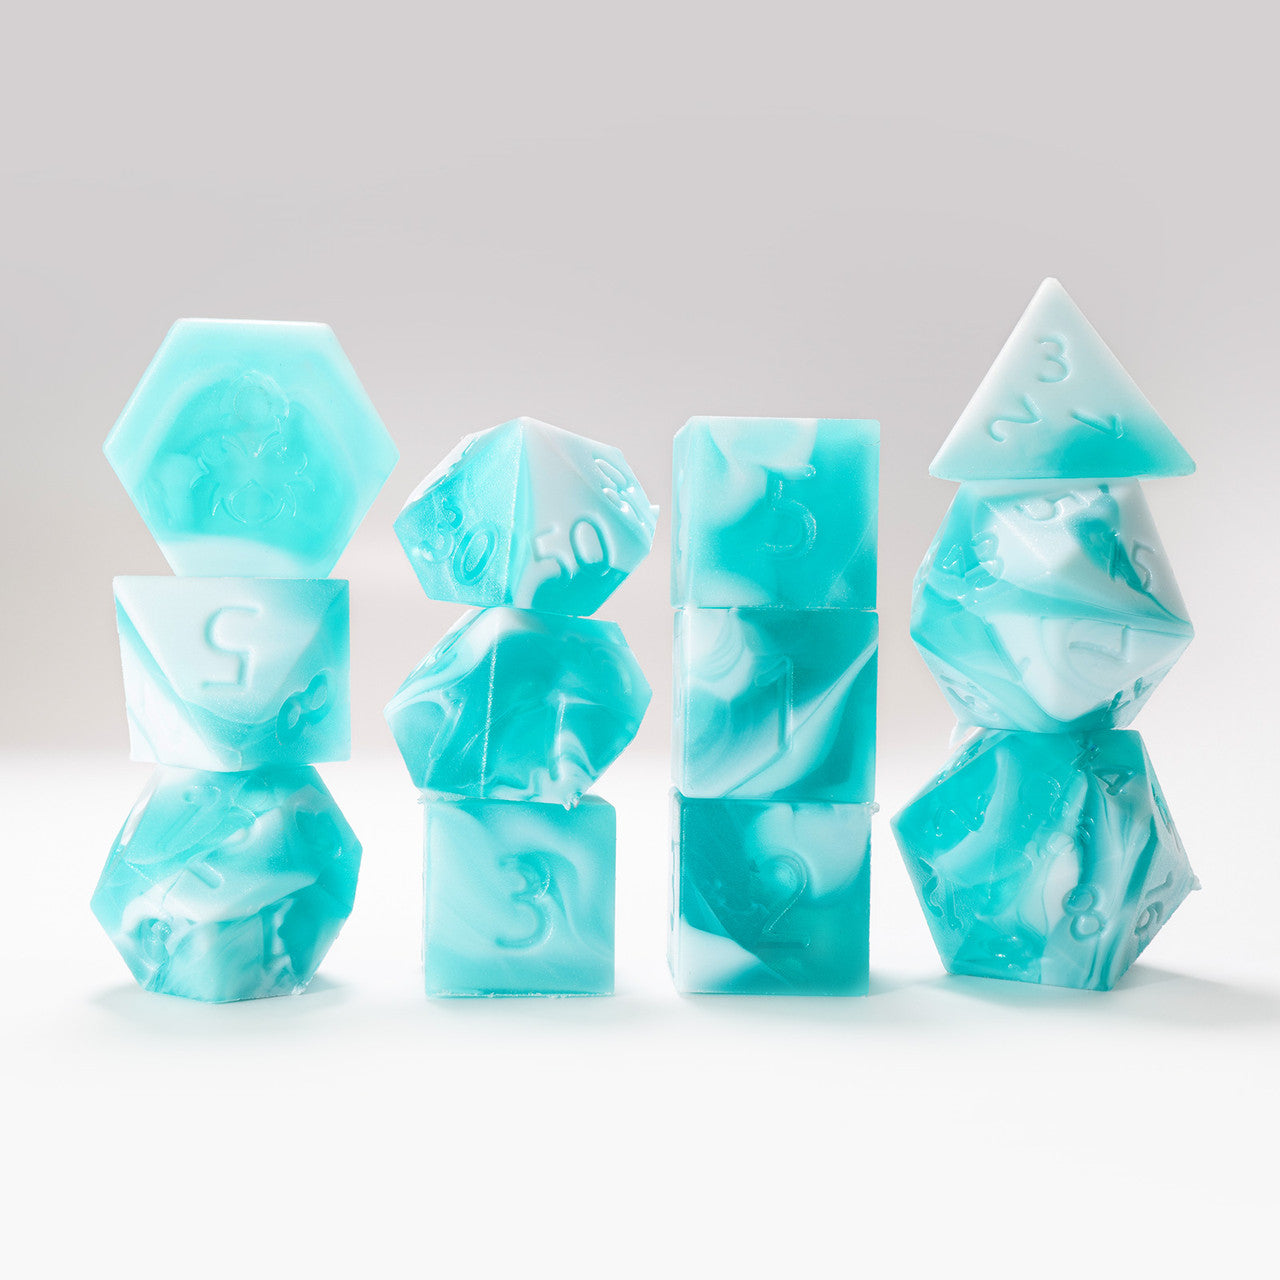 RAW 12pc Teal and White Gummi Baby Shark Do Do Do Do Polyhedral Dice Set